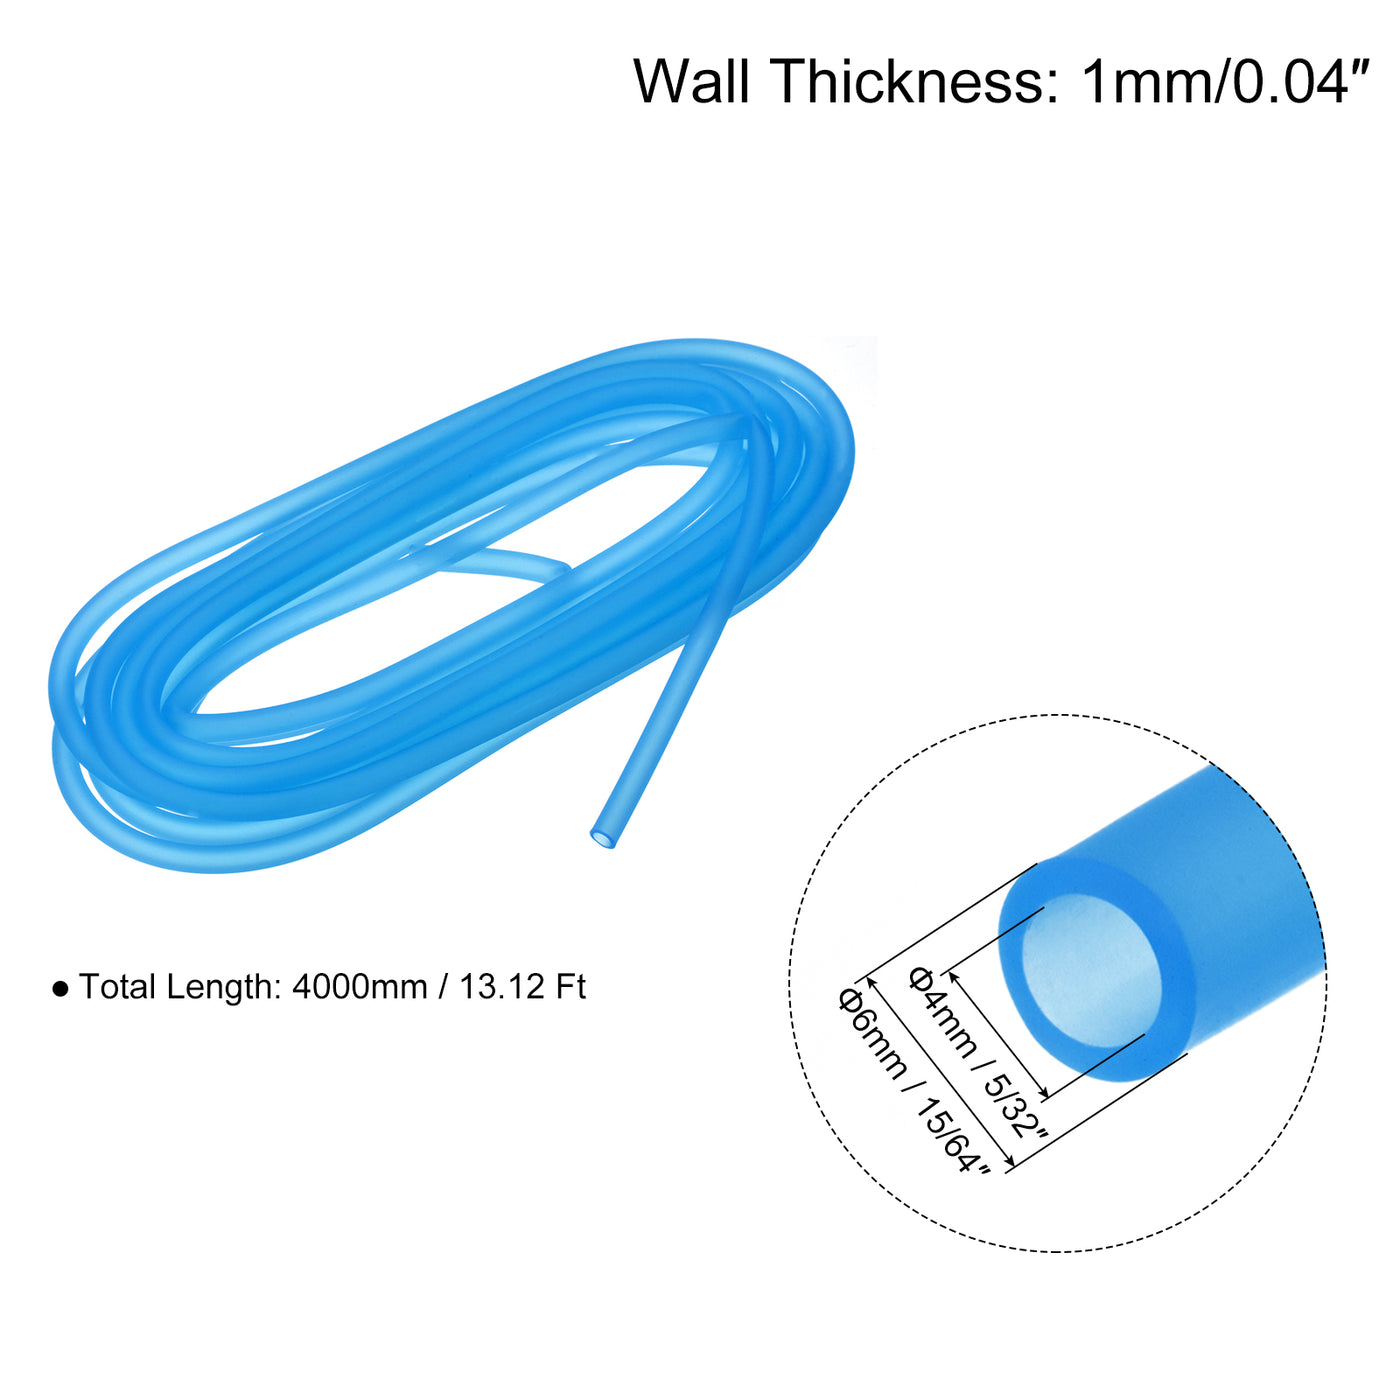 uxcell Uxcell Silicone Tubing 5/32" ID, 15/64" OD 4Pcs 13.12 Ft for Pump Transfer, Blue